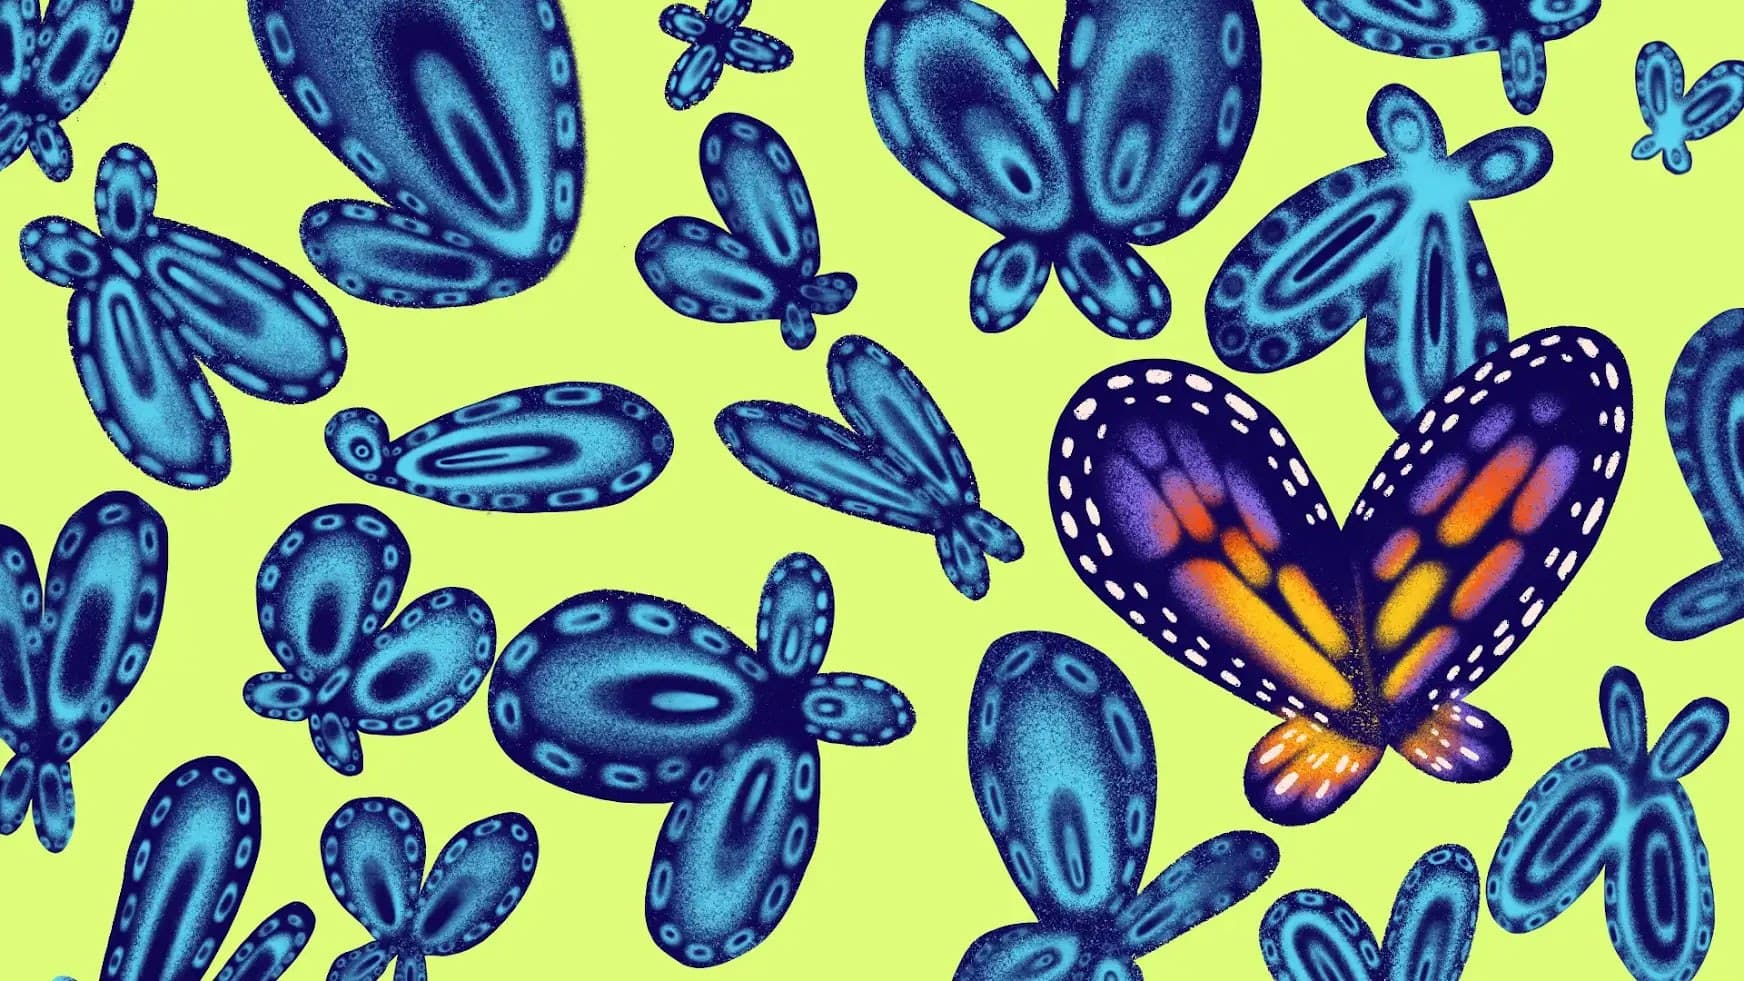 A bright and colorful image features various abstract, balloon-like shapes in shades of blue and dark purple with bold patterns. Among them is a heart-shaped figure with a vibrant yellow and orange center. The background is a light green hue.